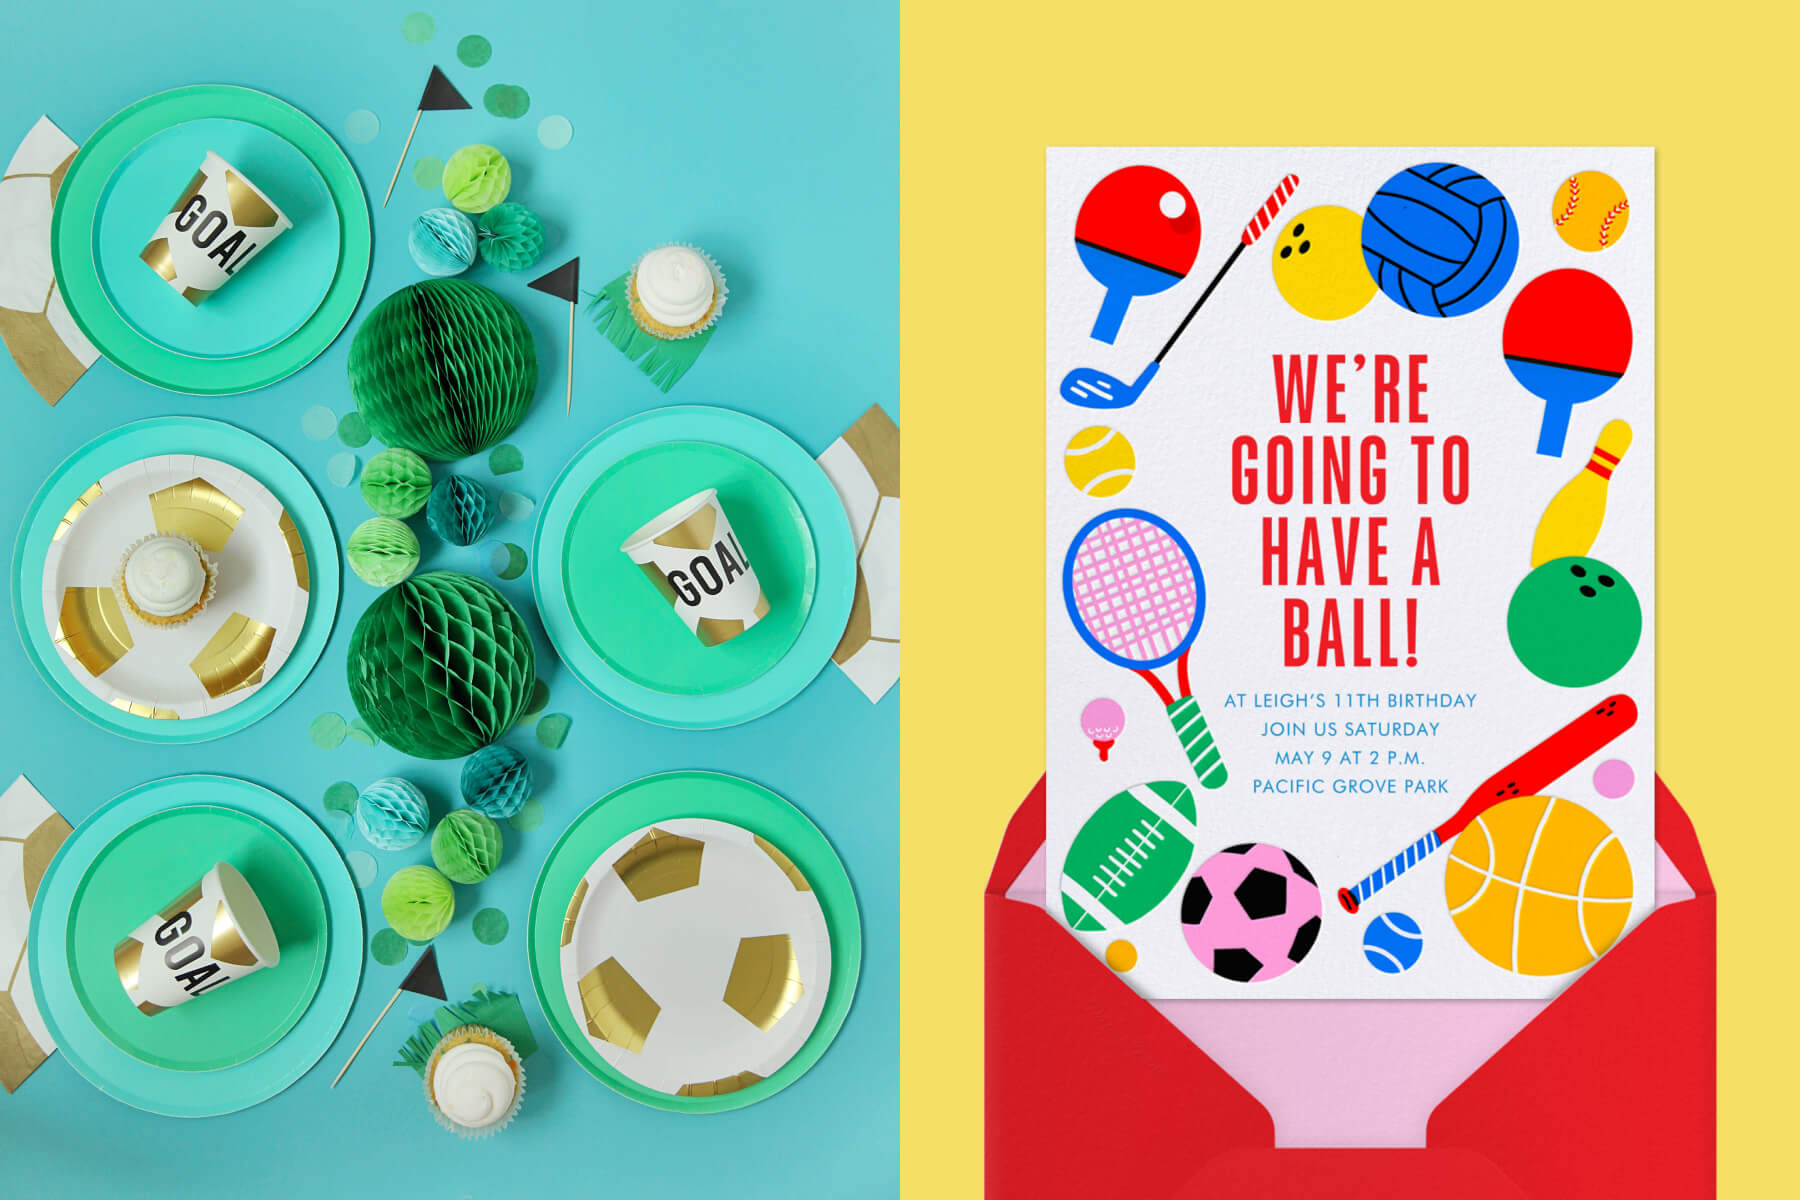 Left: Overhead photograph of a teal table with teal, gold, and green table settings with a soccer theme; right: a white invitation with illustrations of sports items like soccer balls, baseball bats, tennis rackets, etc.